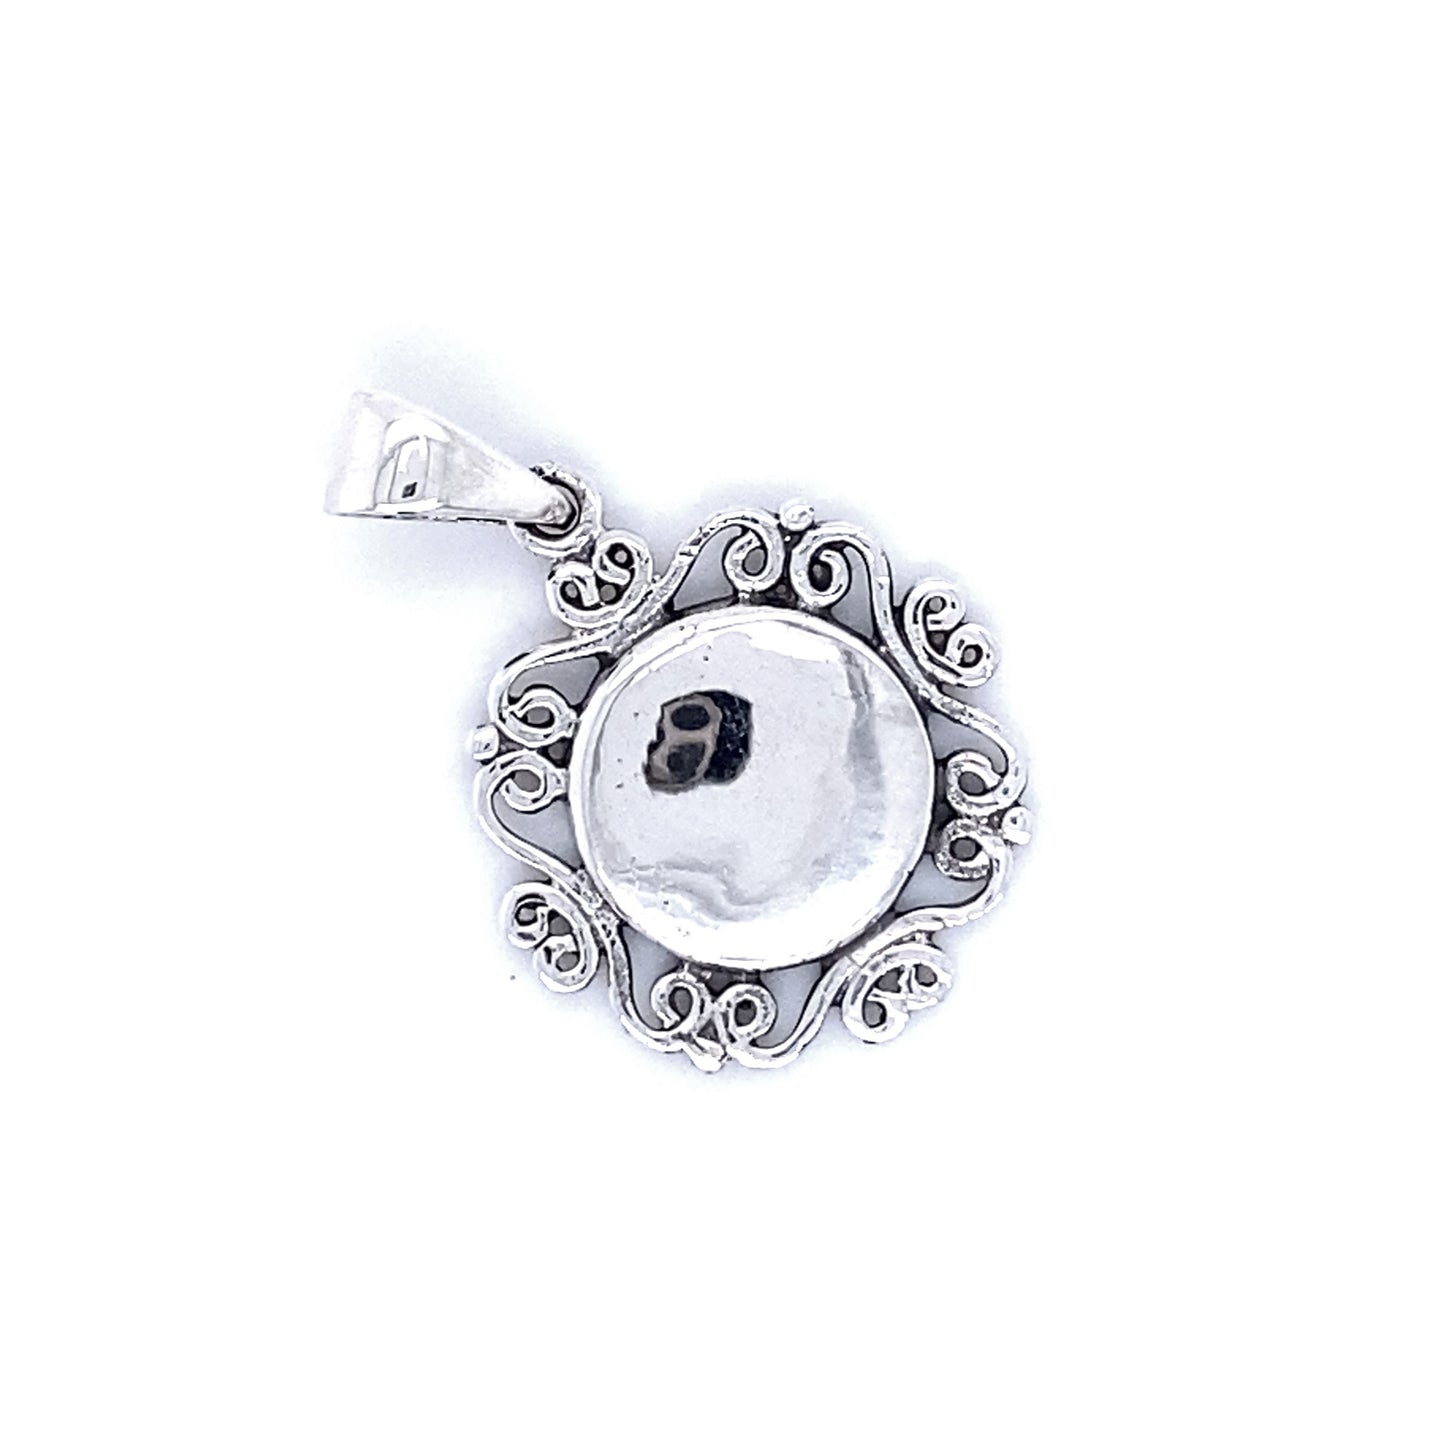 
                  
                    Engravable Pendant with Filigree Border with a round reflective centerpiece, surrounded by an ornate filigree design. Perfect as a personalized gift, it offers the option of custom engraving to make it truly unique.
                  
                